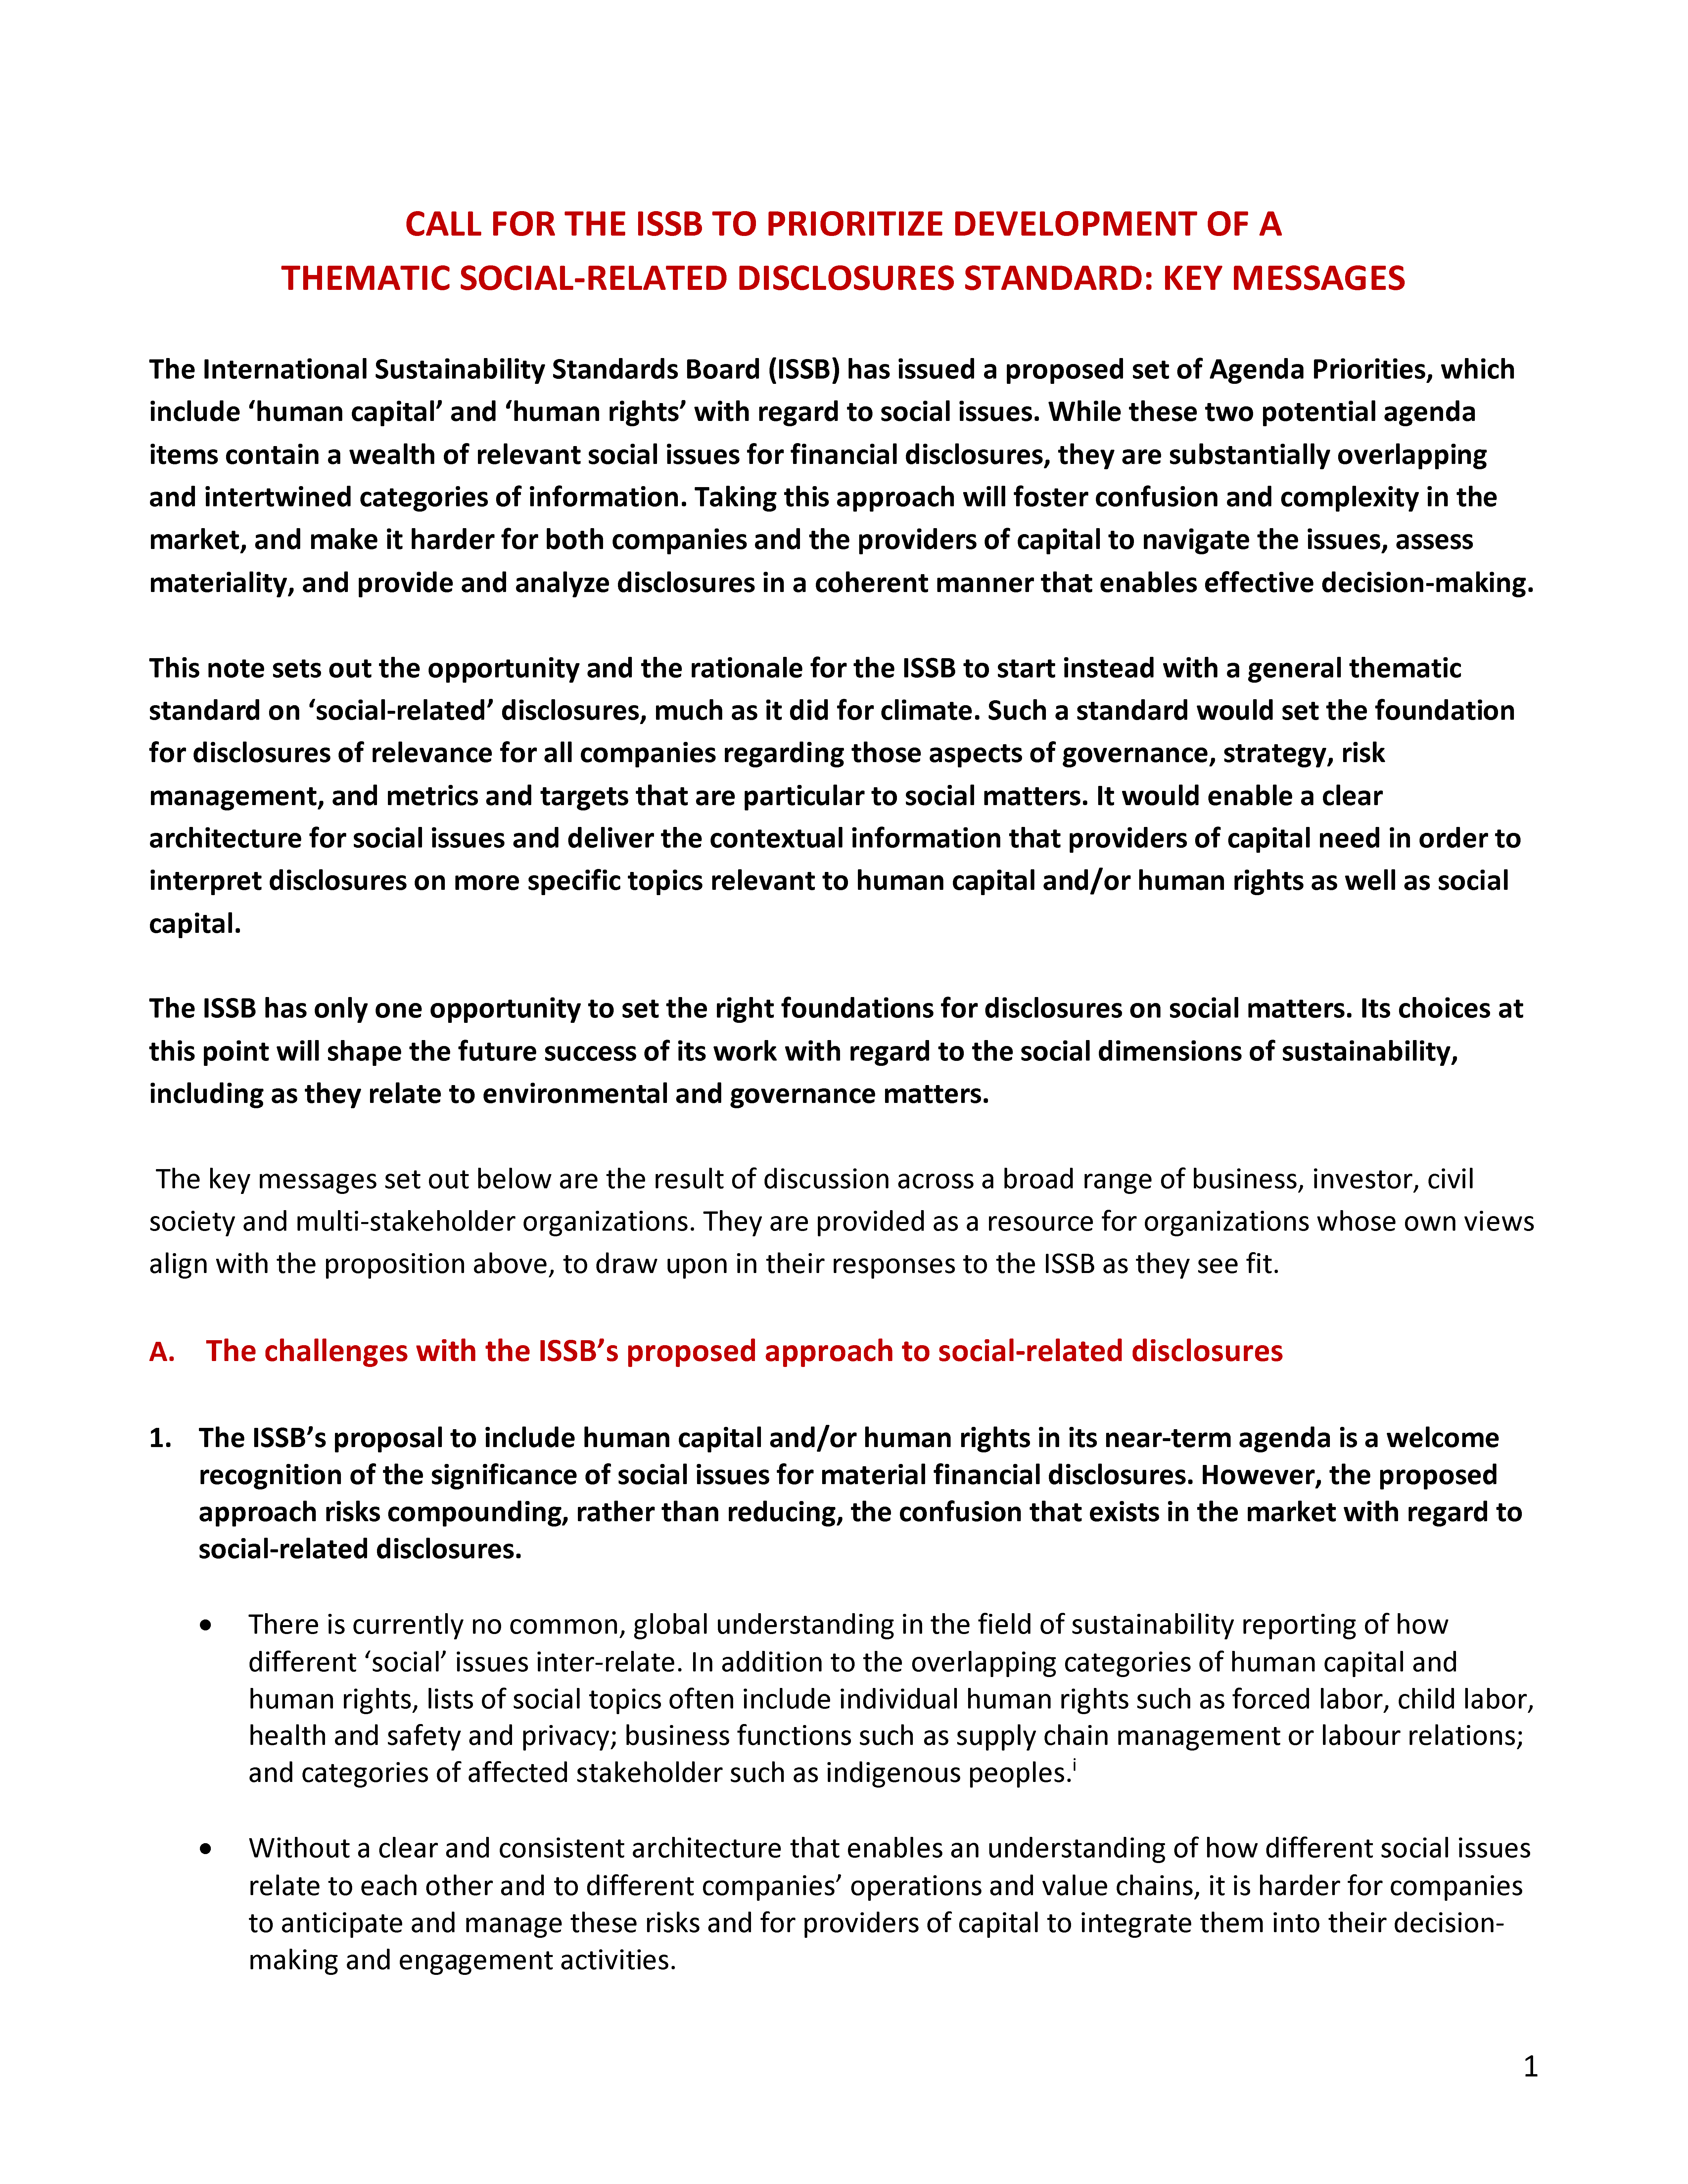 Call for the ISSB to prioritize development of a thematic social-related disclosures standard